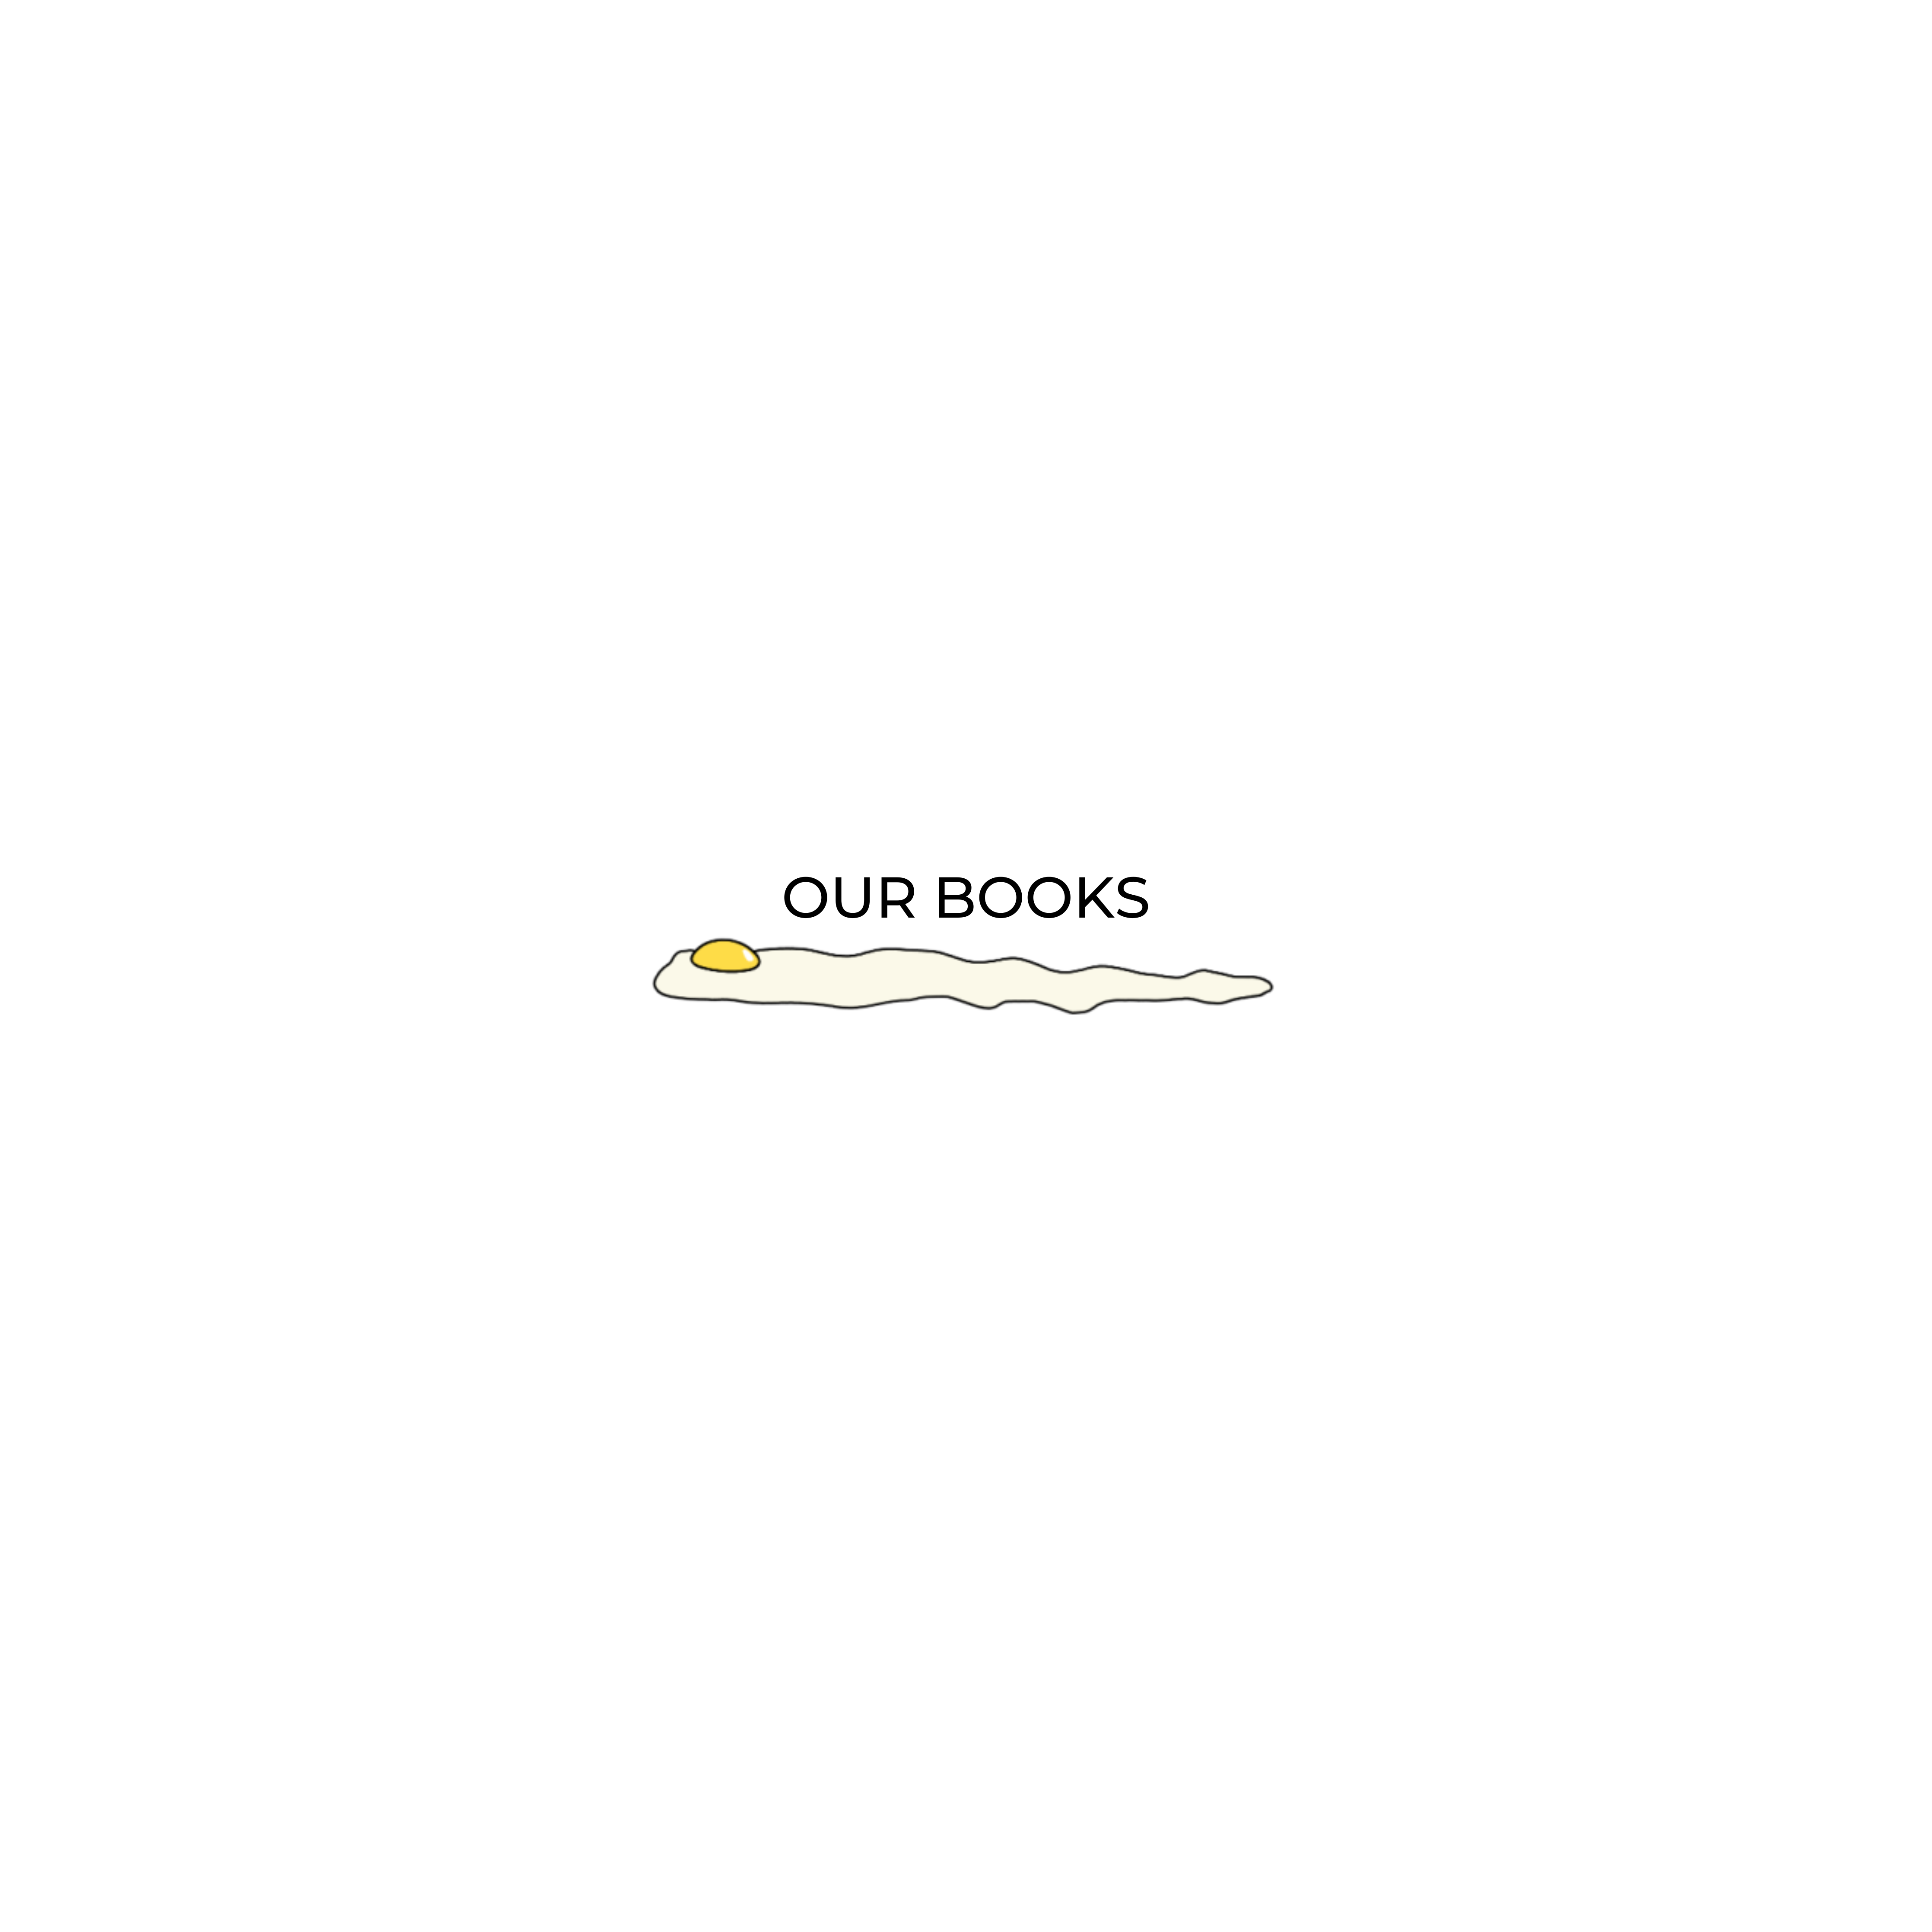 OUR BOOKS